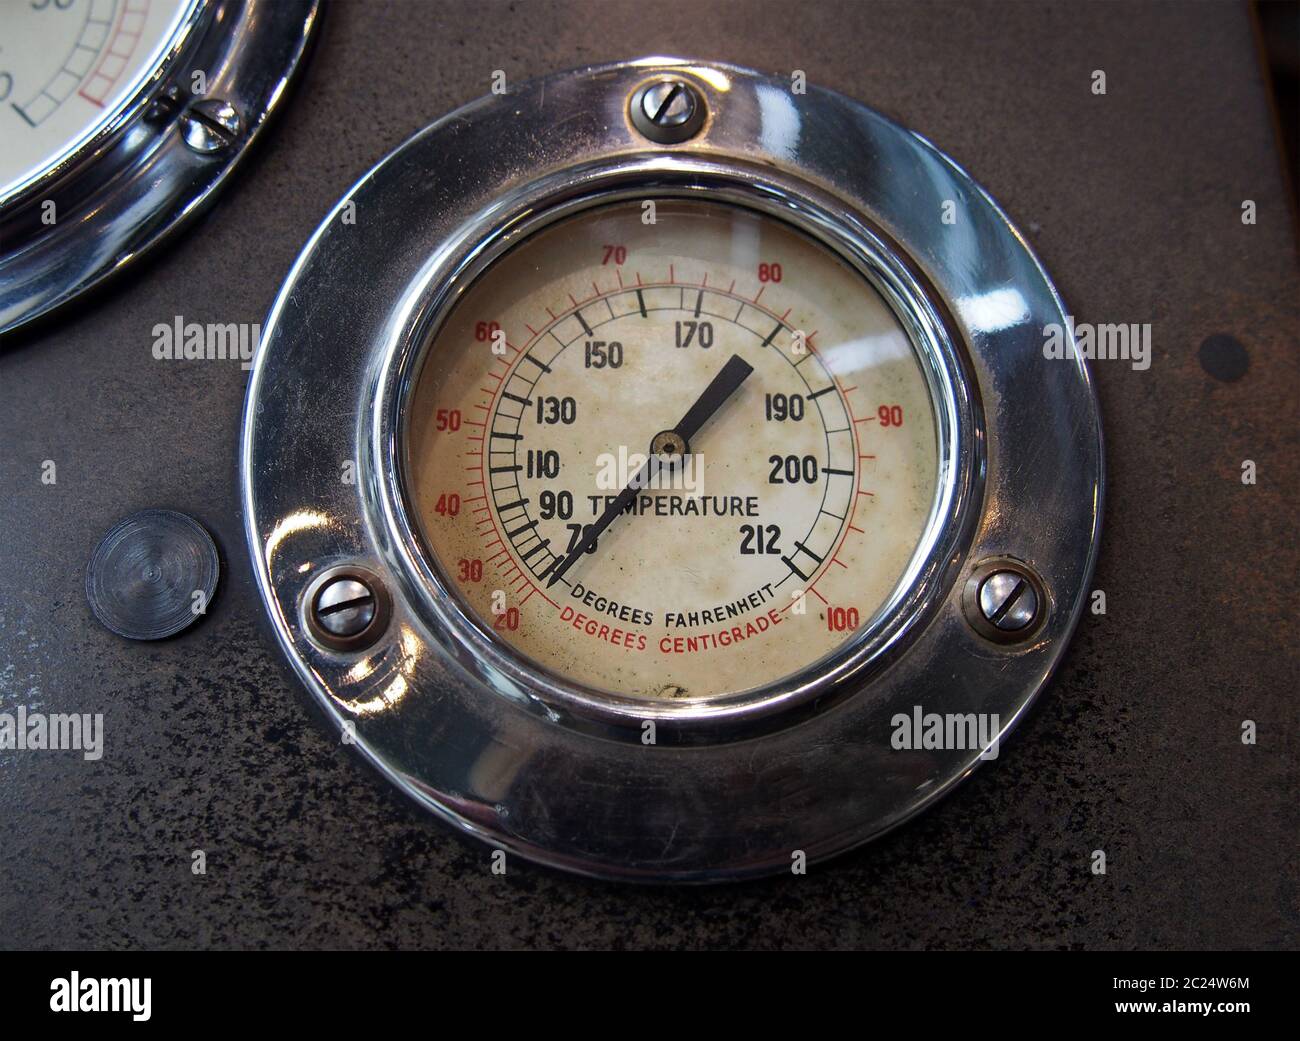 close up of an old round metal temperature gauge with the meter reading in Fahrenheit and Celsius with a shiny chrome surround m Stock Photo